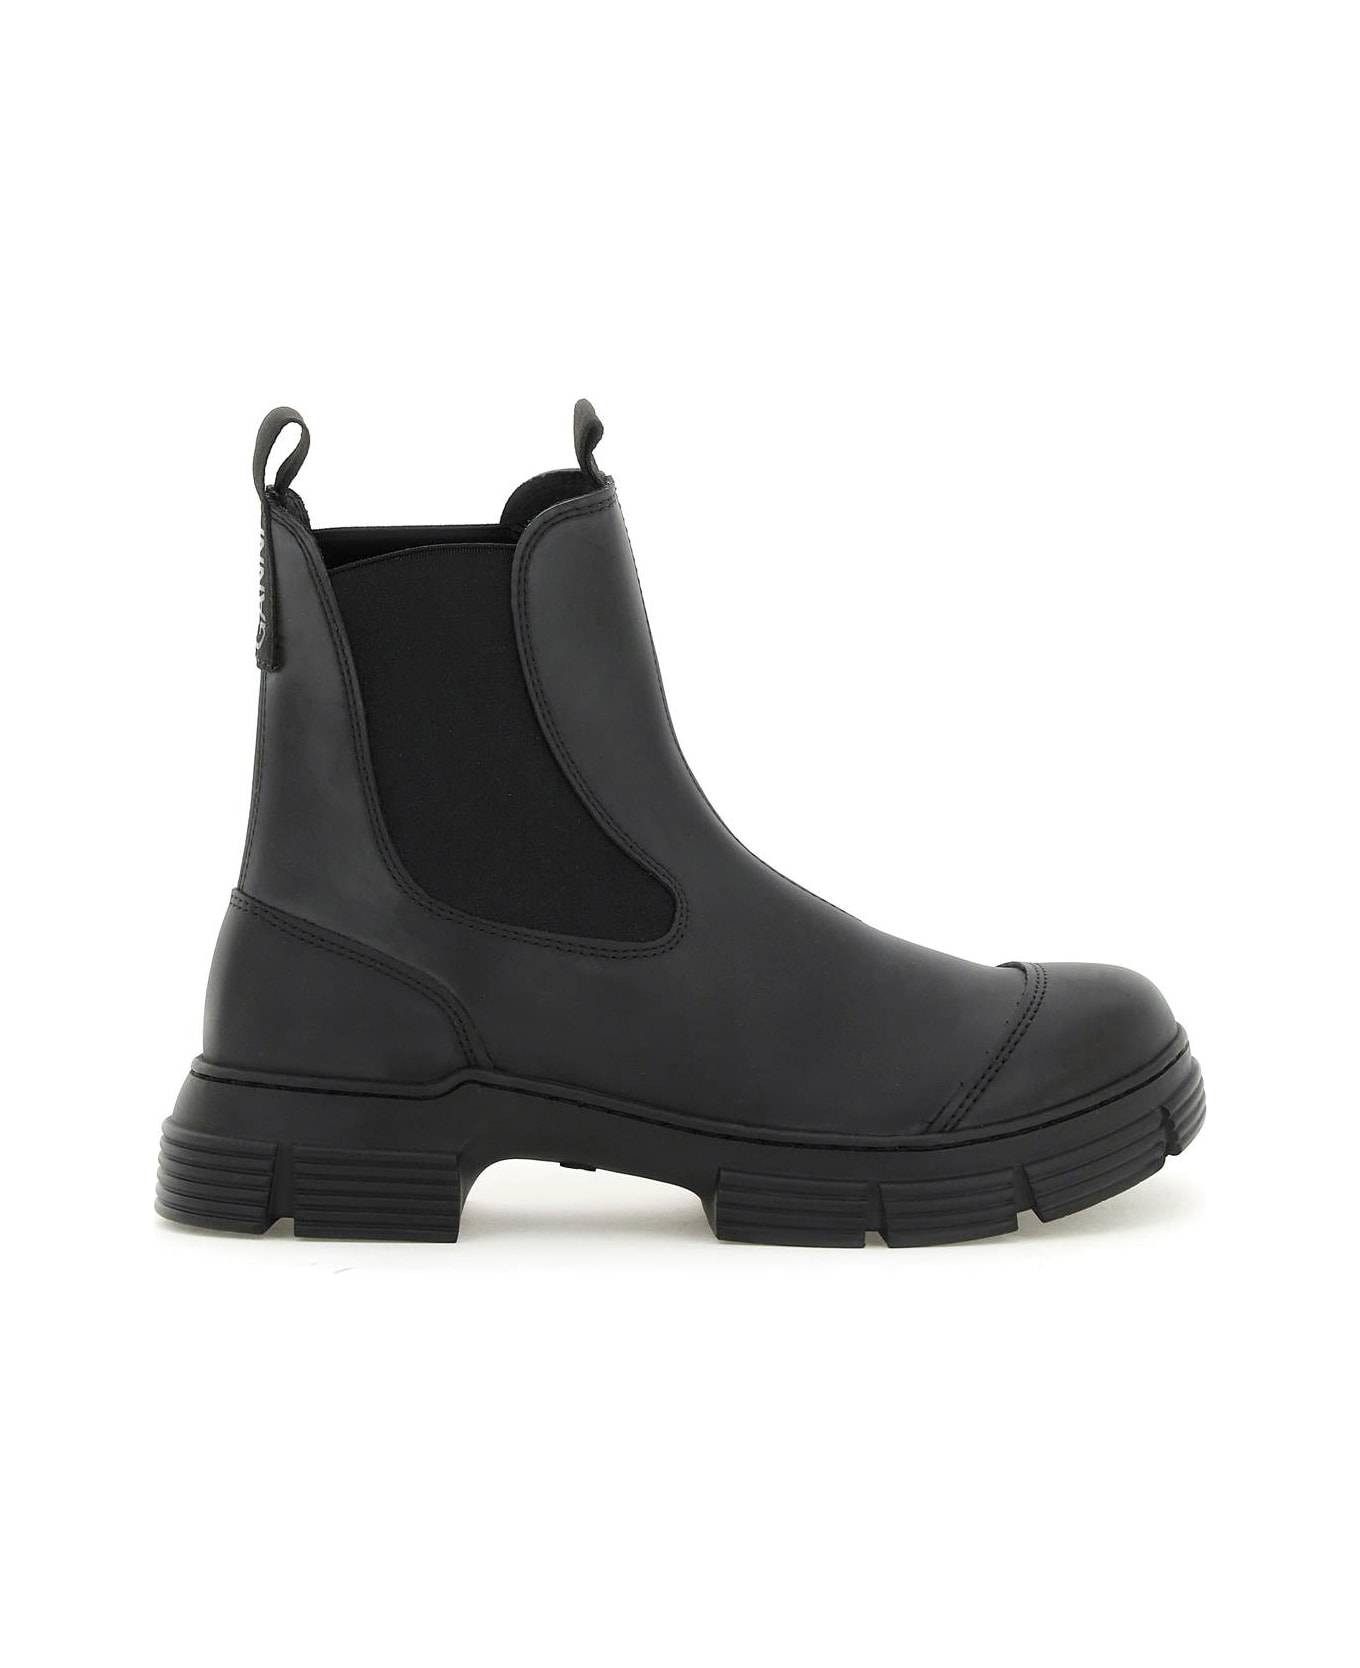 Ganni Recycled Rubber Chelsea Ankle Boots - Black ブーツ